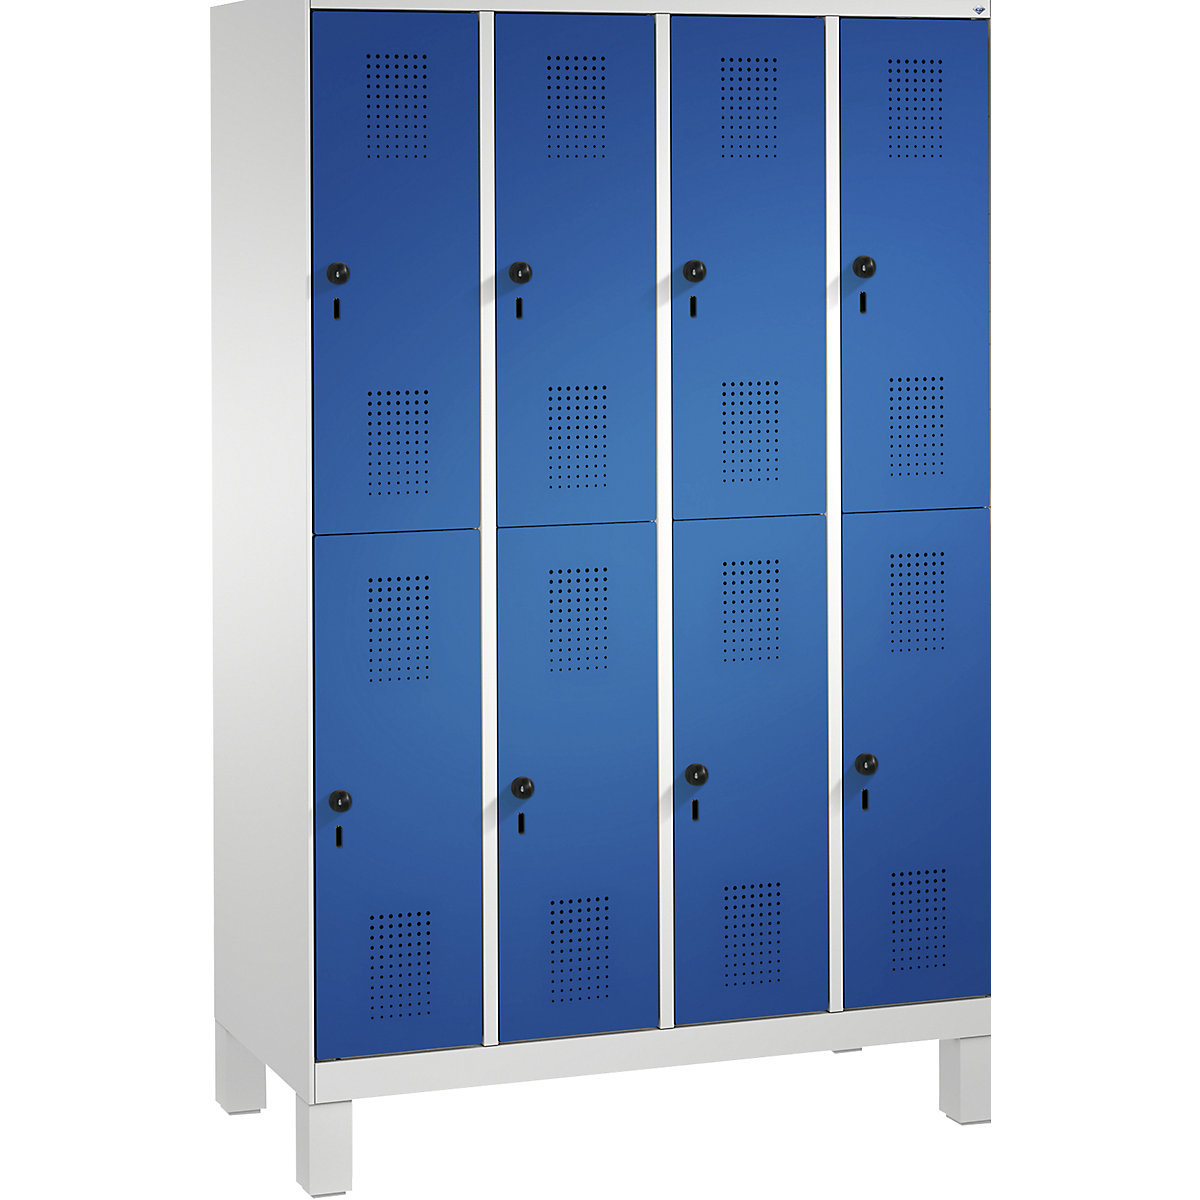 EVOLO cloakroom locker, double tier, with feet – C+P, 4 compartments, 2 shelf compartments each, compartment width 300 mm, light grey / gentian blue-15